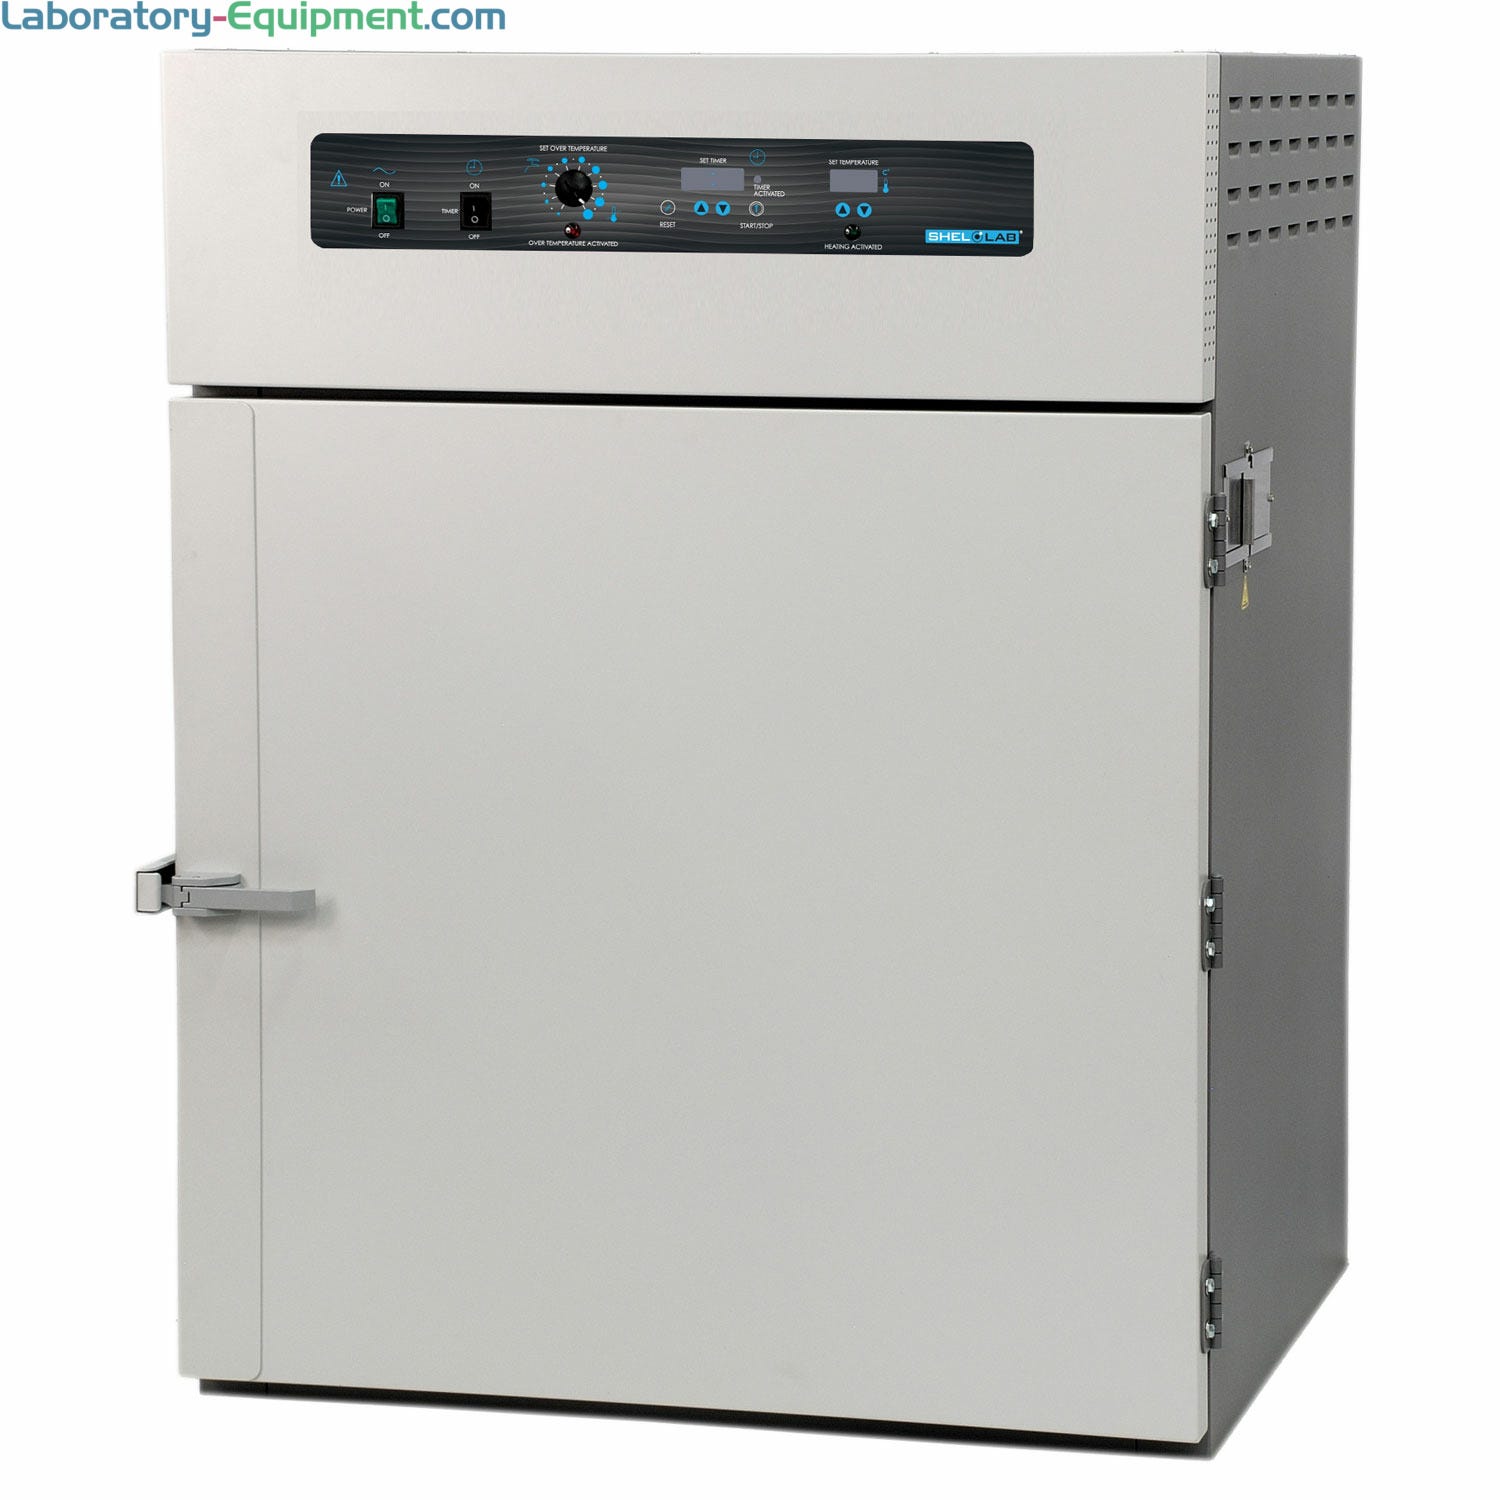 Large Capacity Forced-Air Oven by Shel Lab